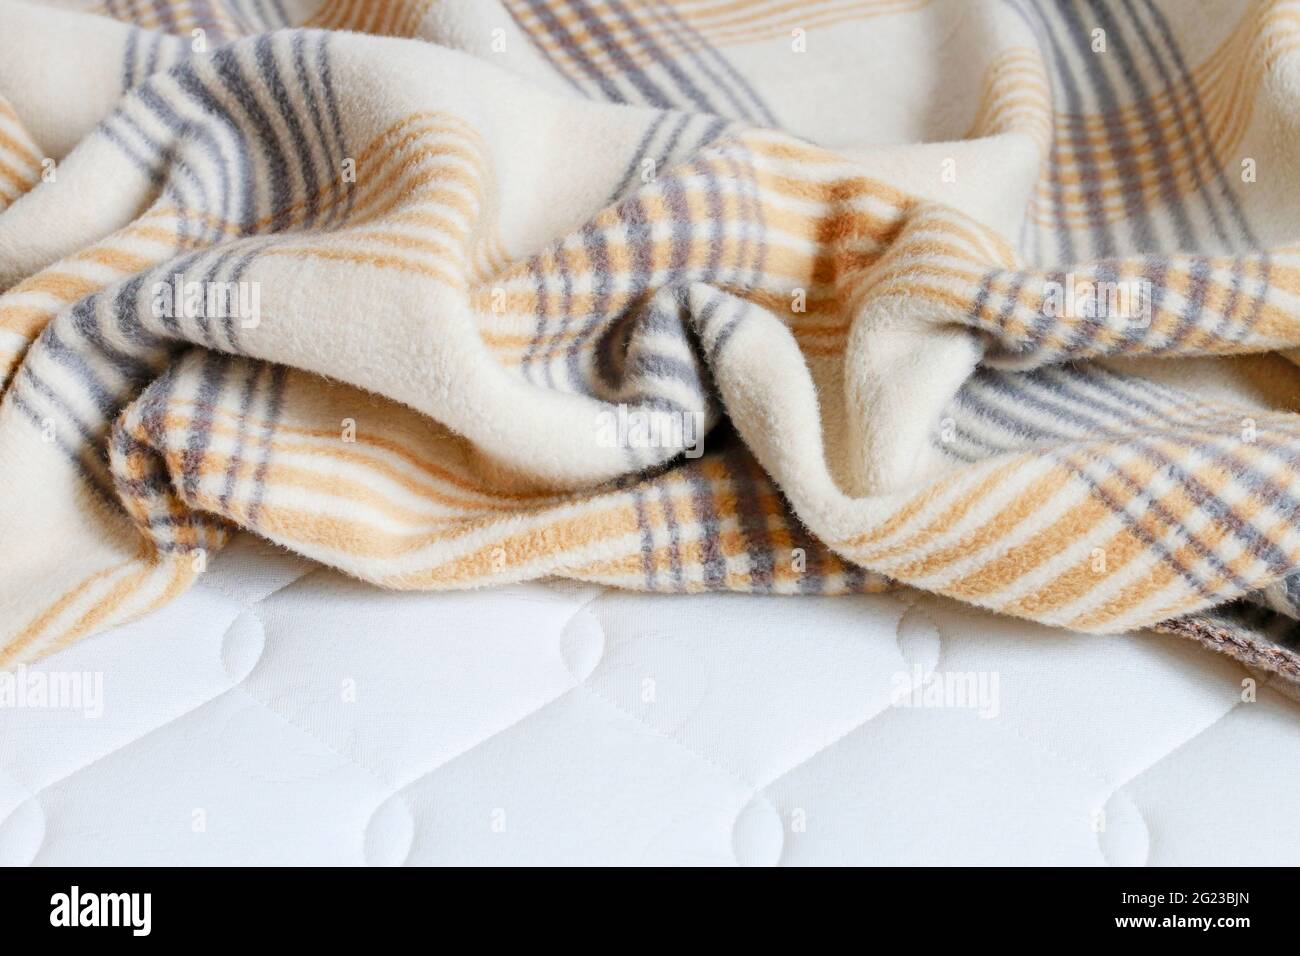 Beige blanket on the new mattress. Graphic resources Stock Photo